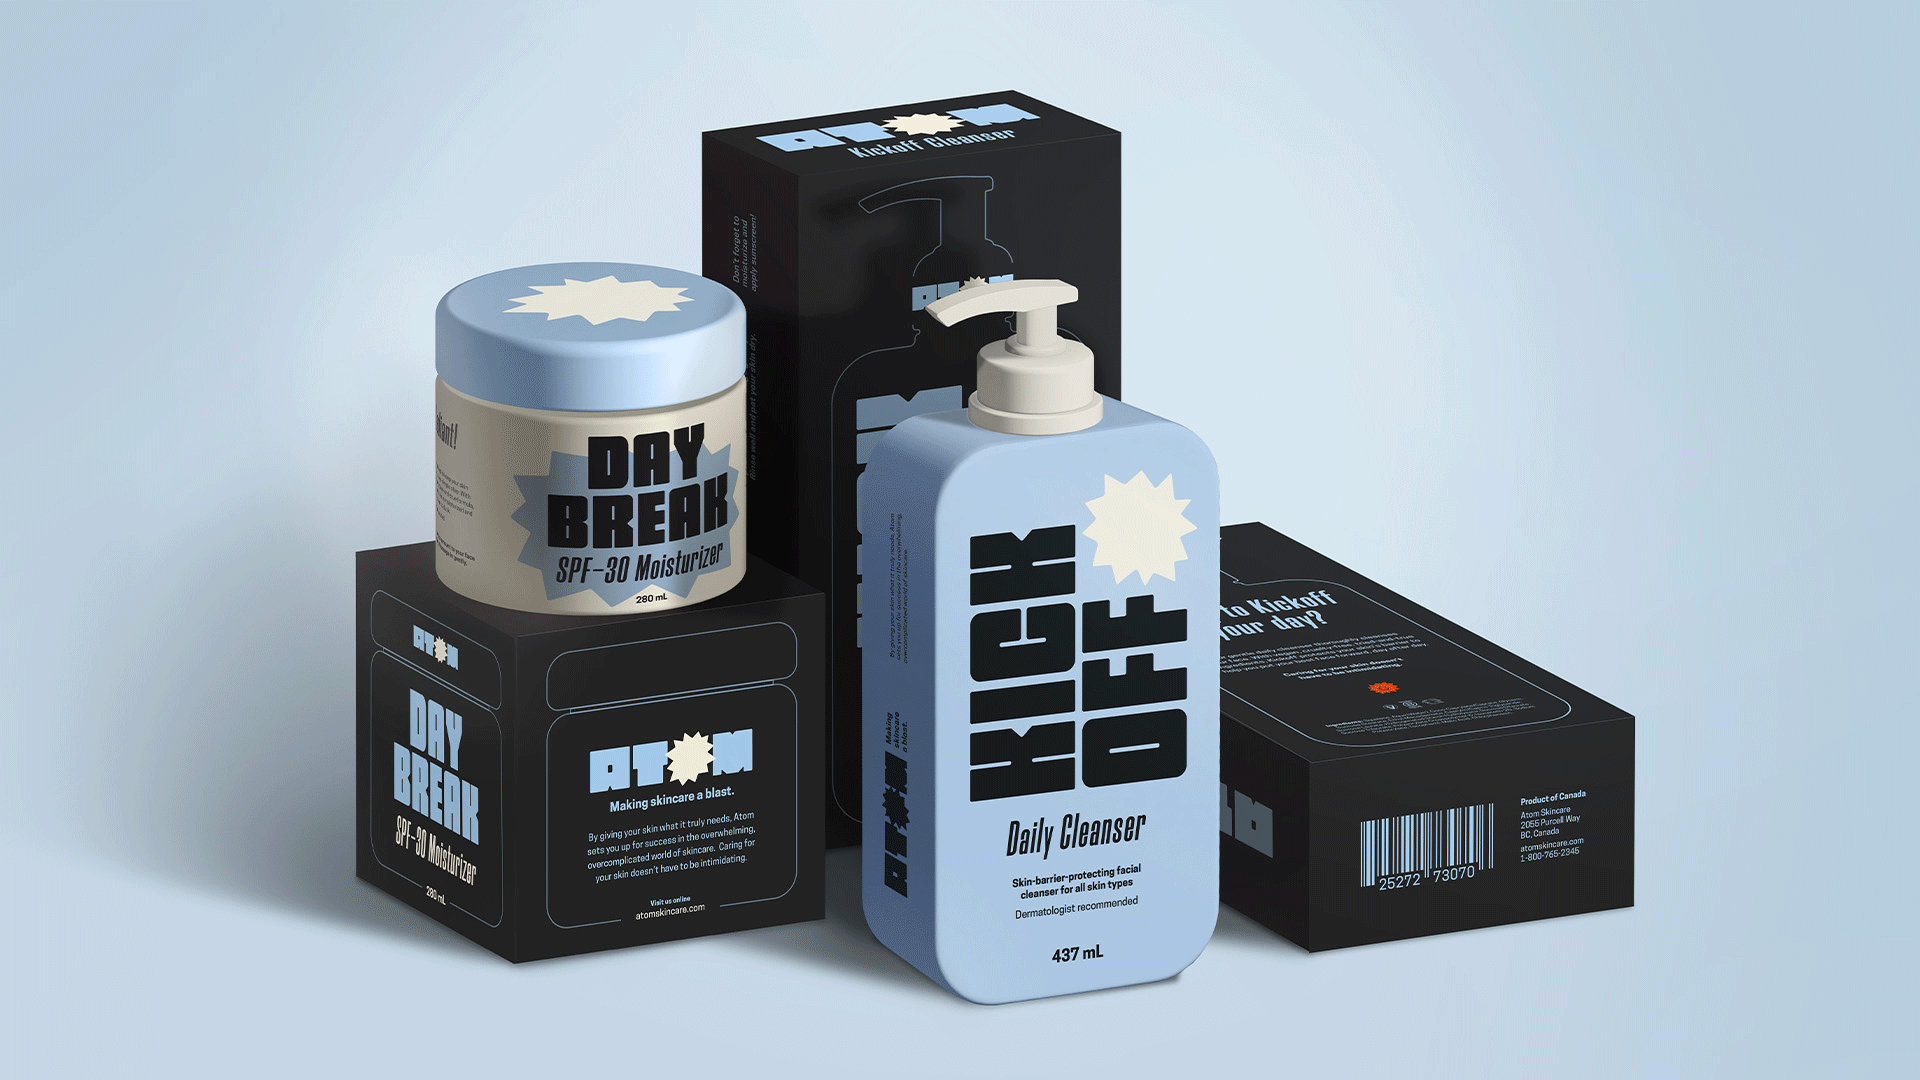 Series of images depicting packaging, labels, and mobile screens. All images are primarily blue, black, and white.